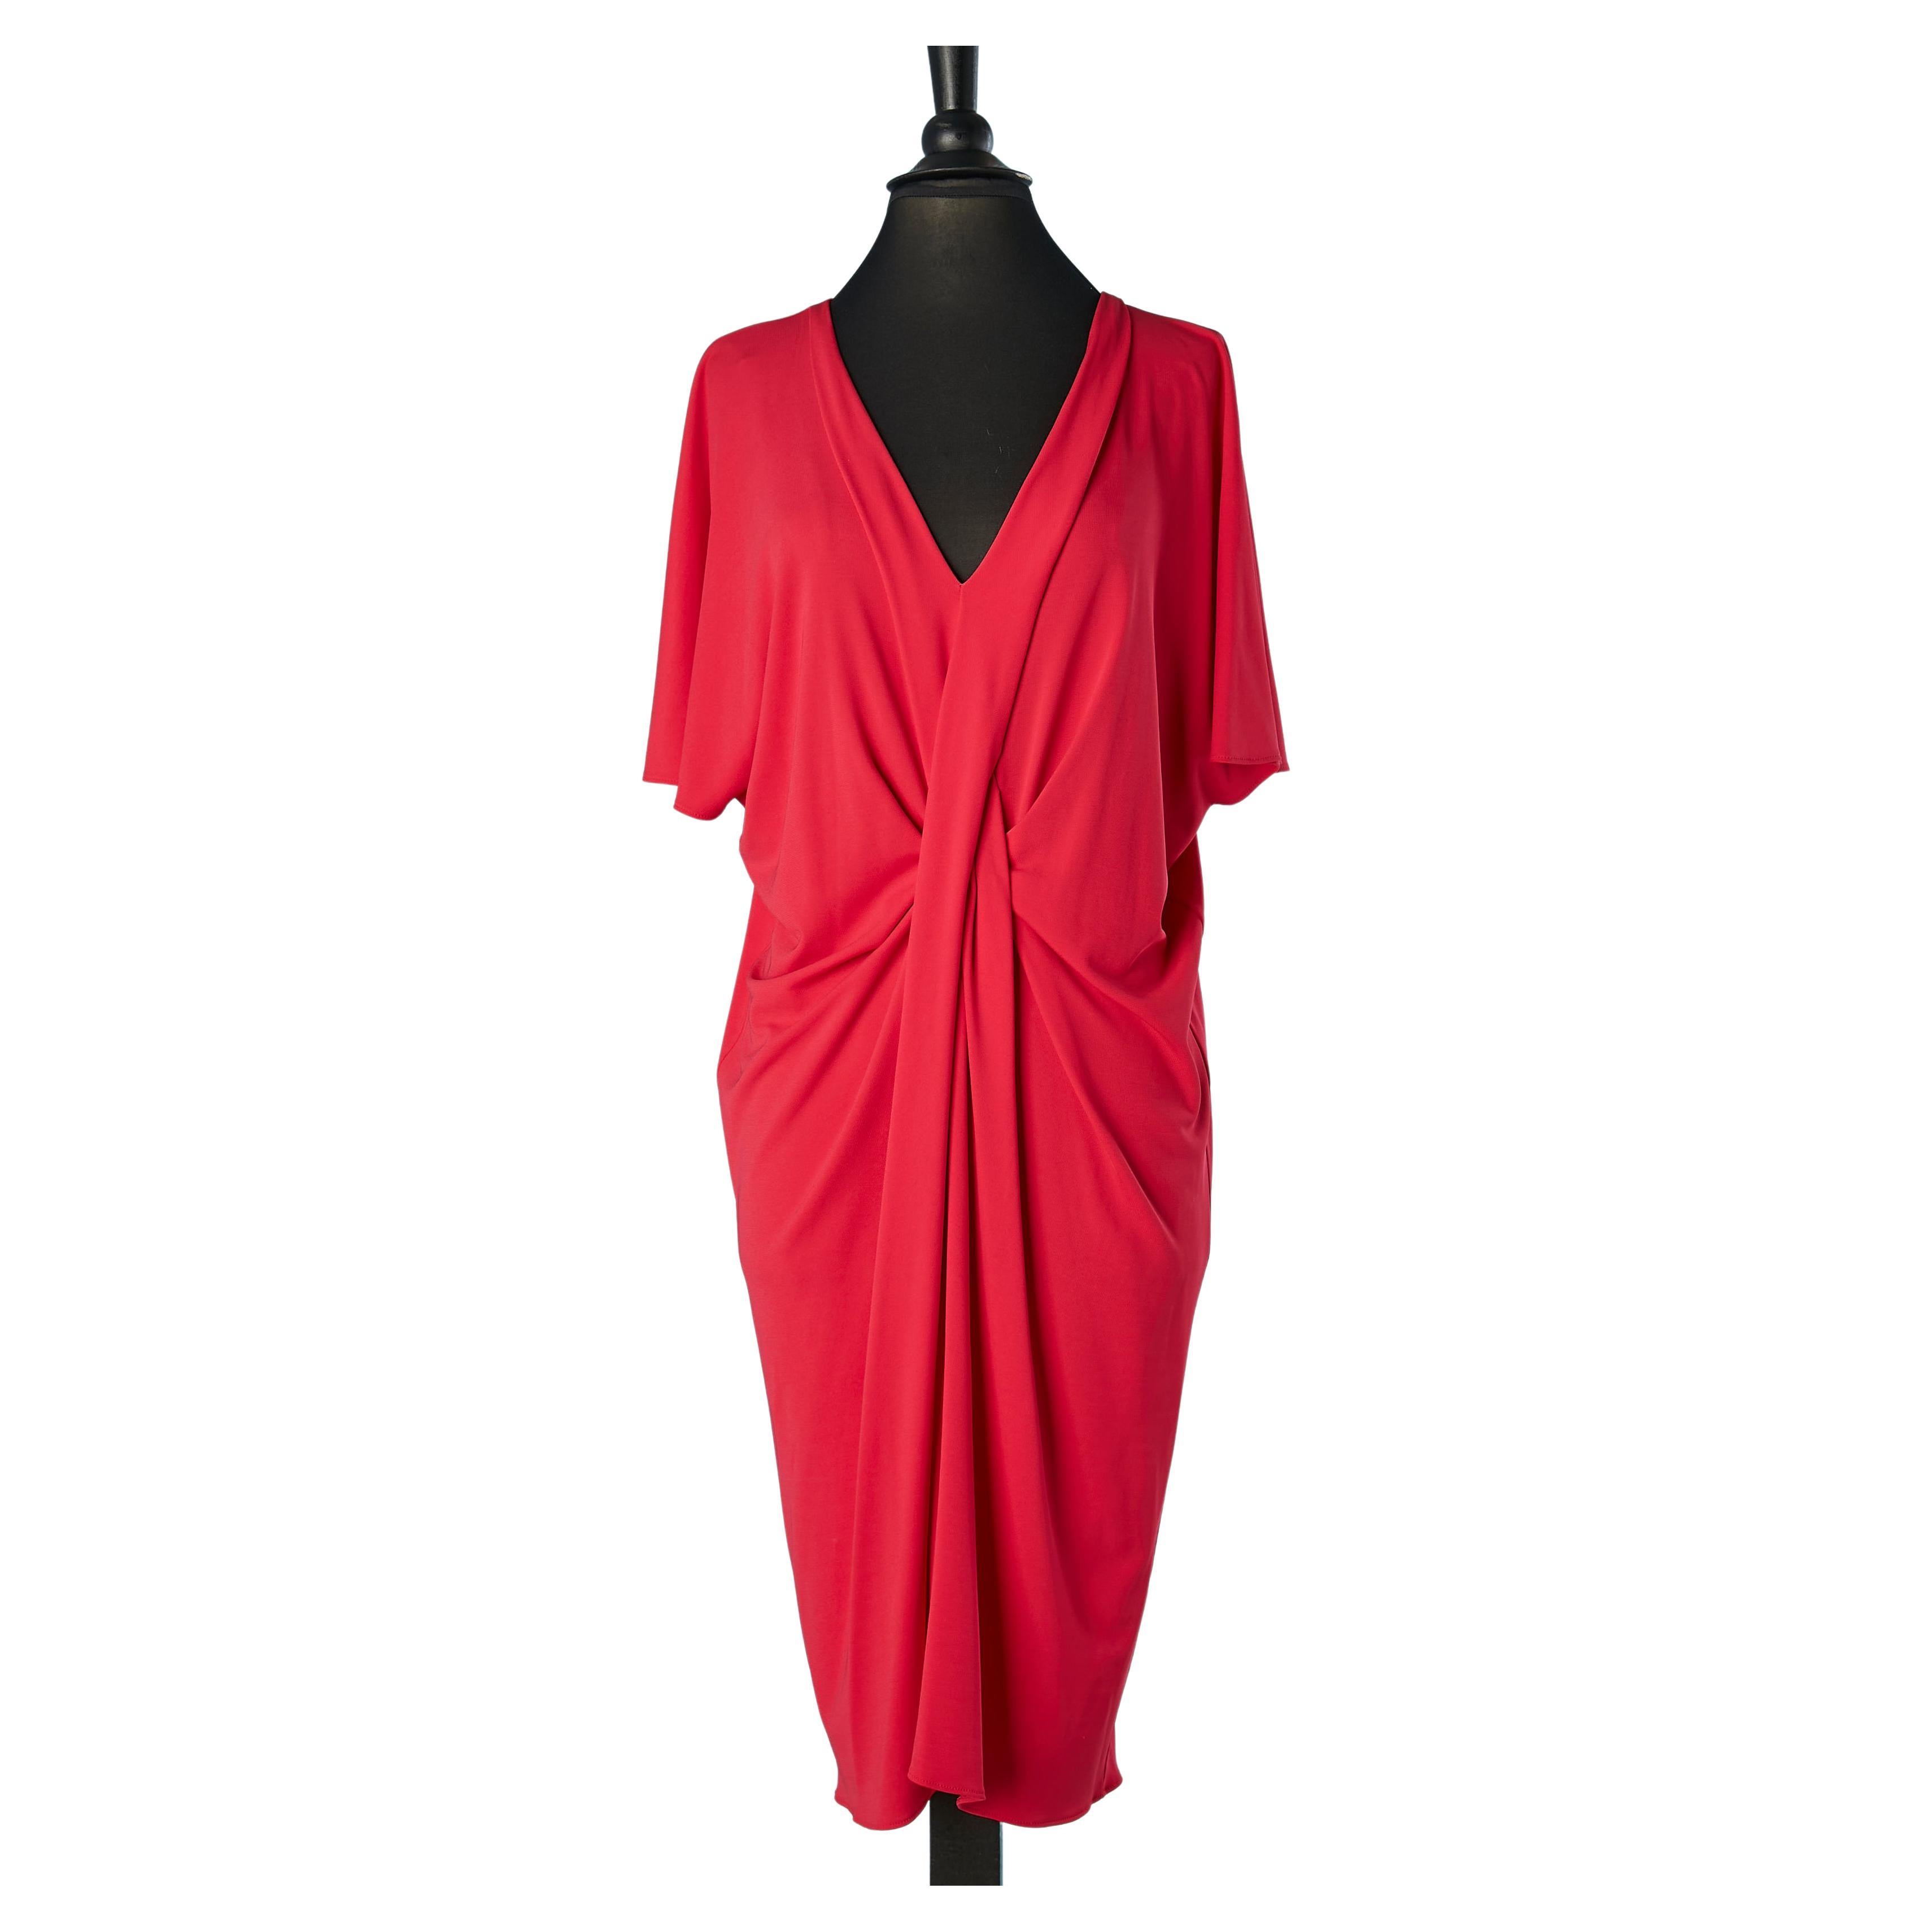 Red jersey cocktail dress draped in the front Lanvin par Alber Elbaz FW 2015 For Sale